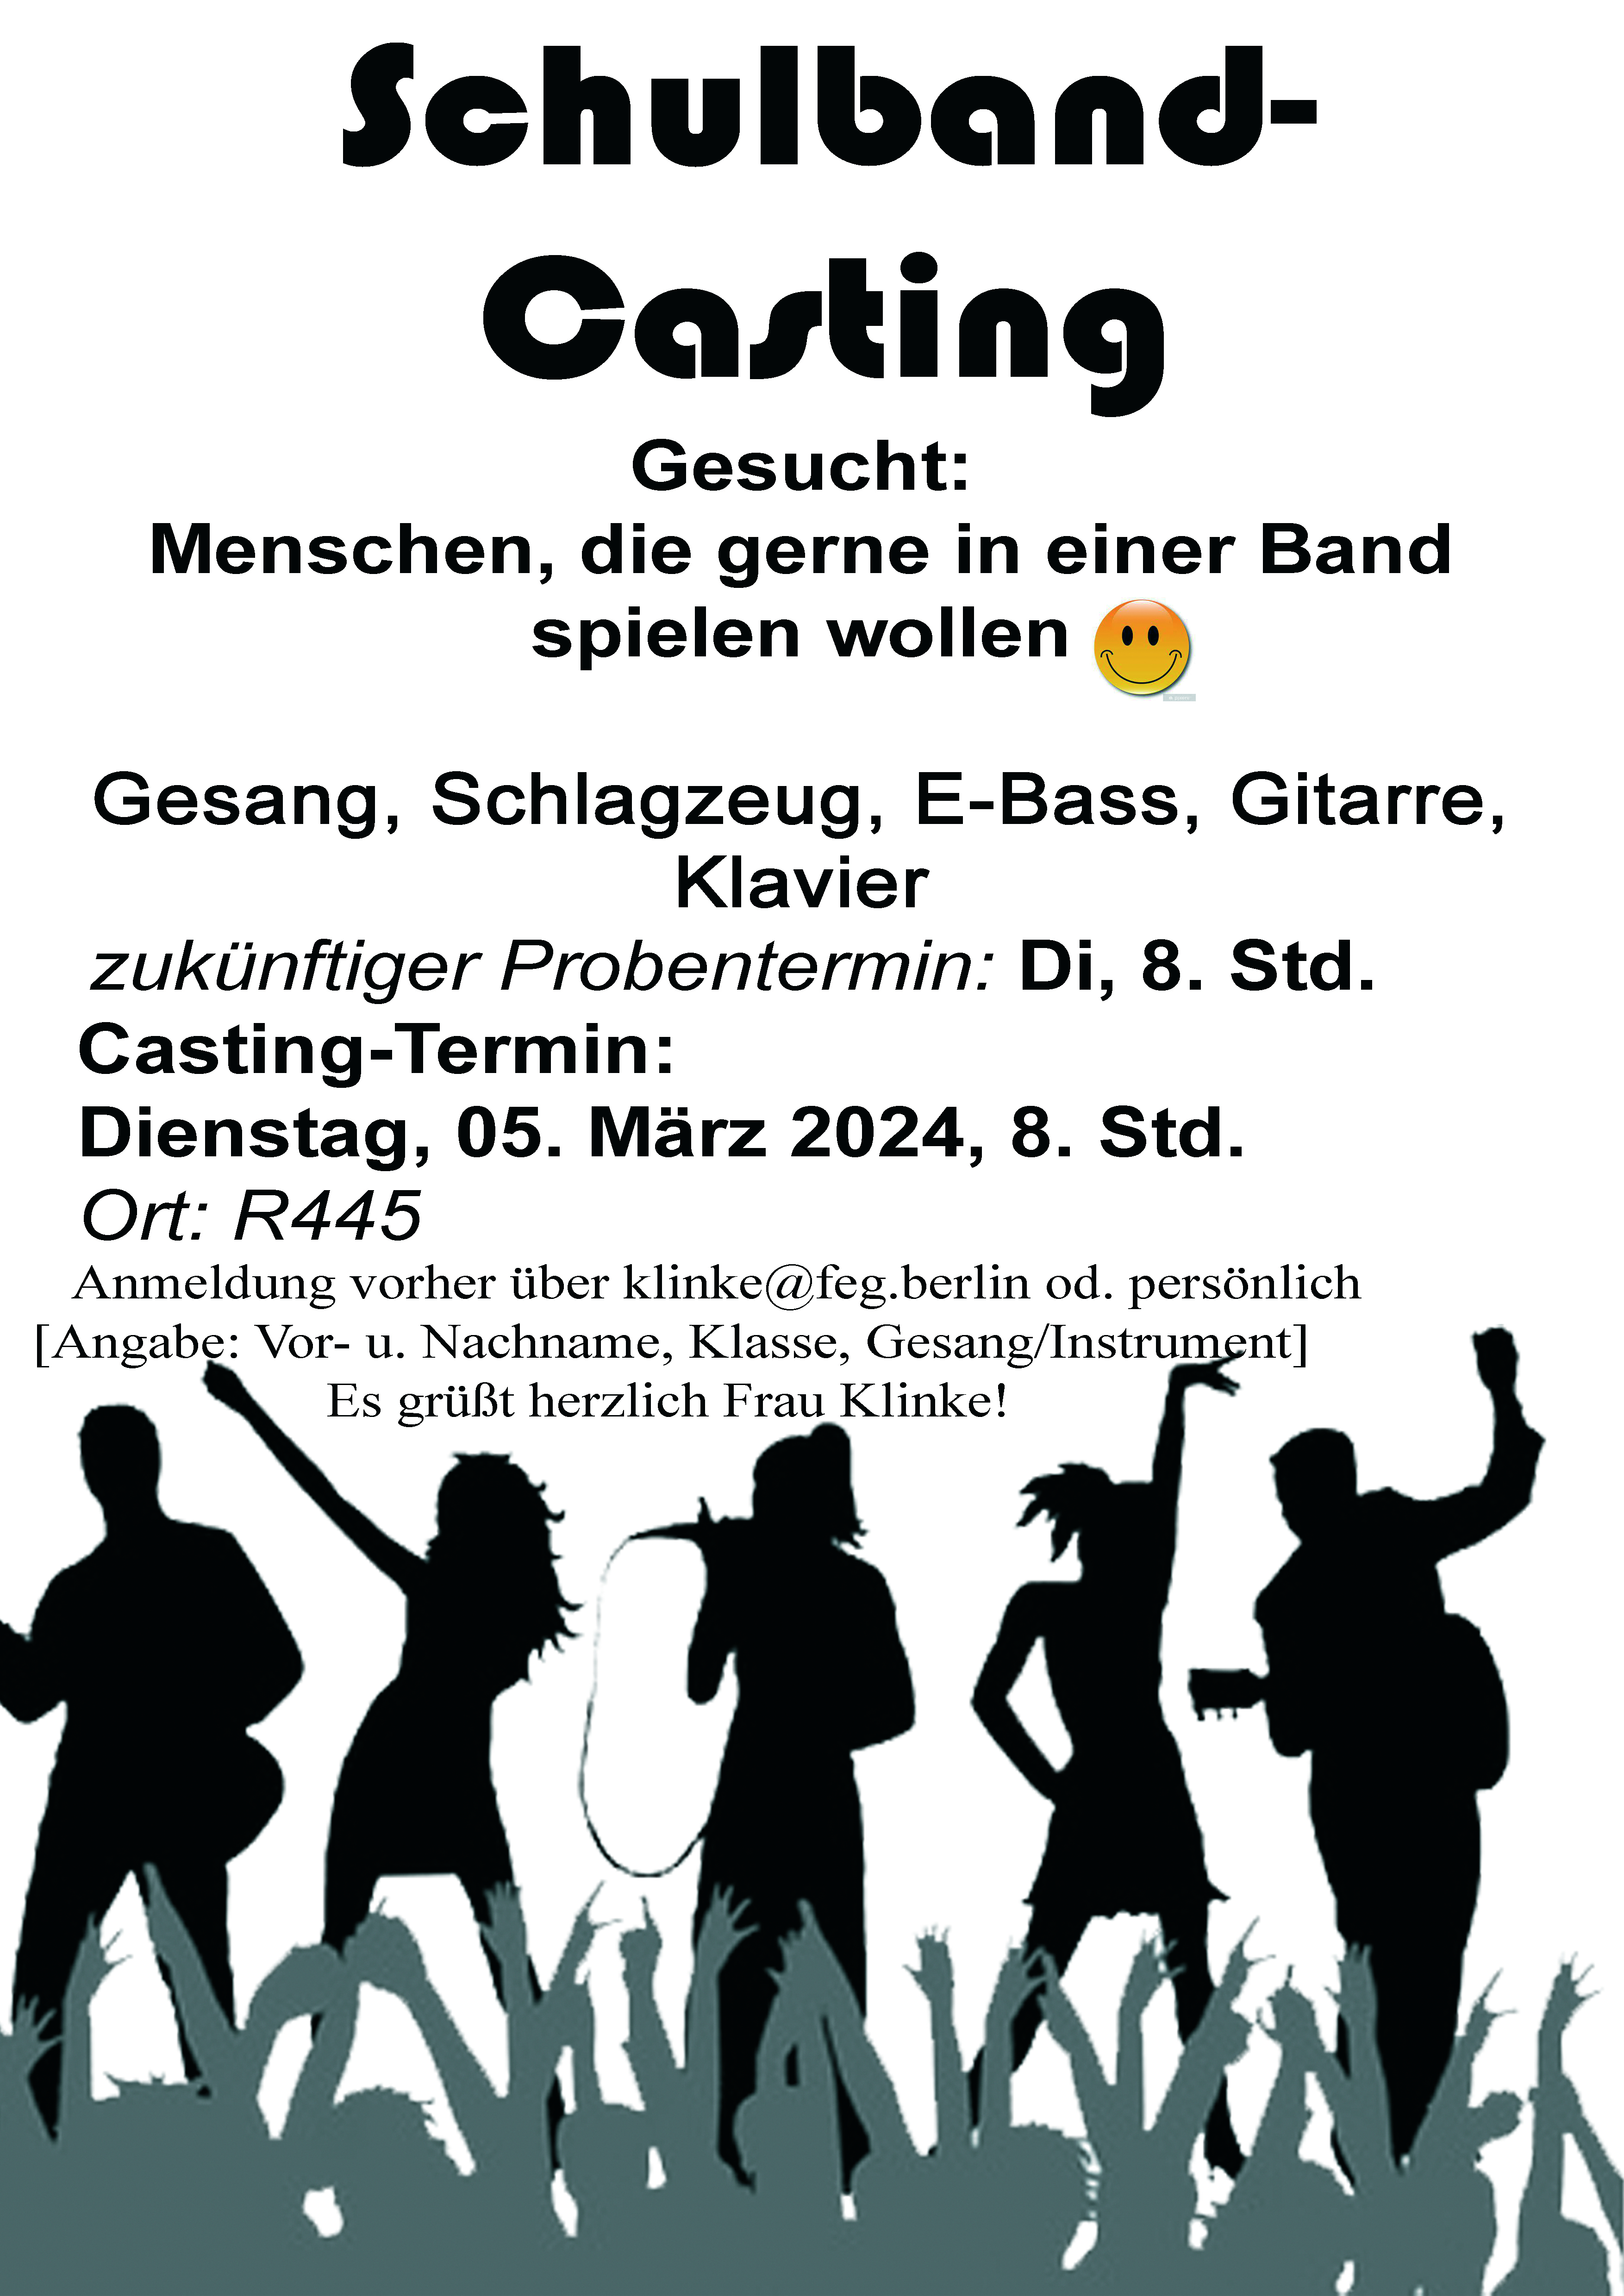 Schulband-Casting